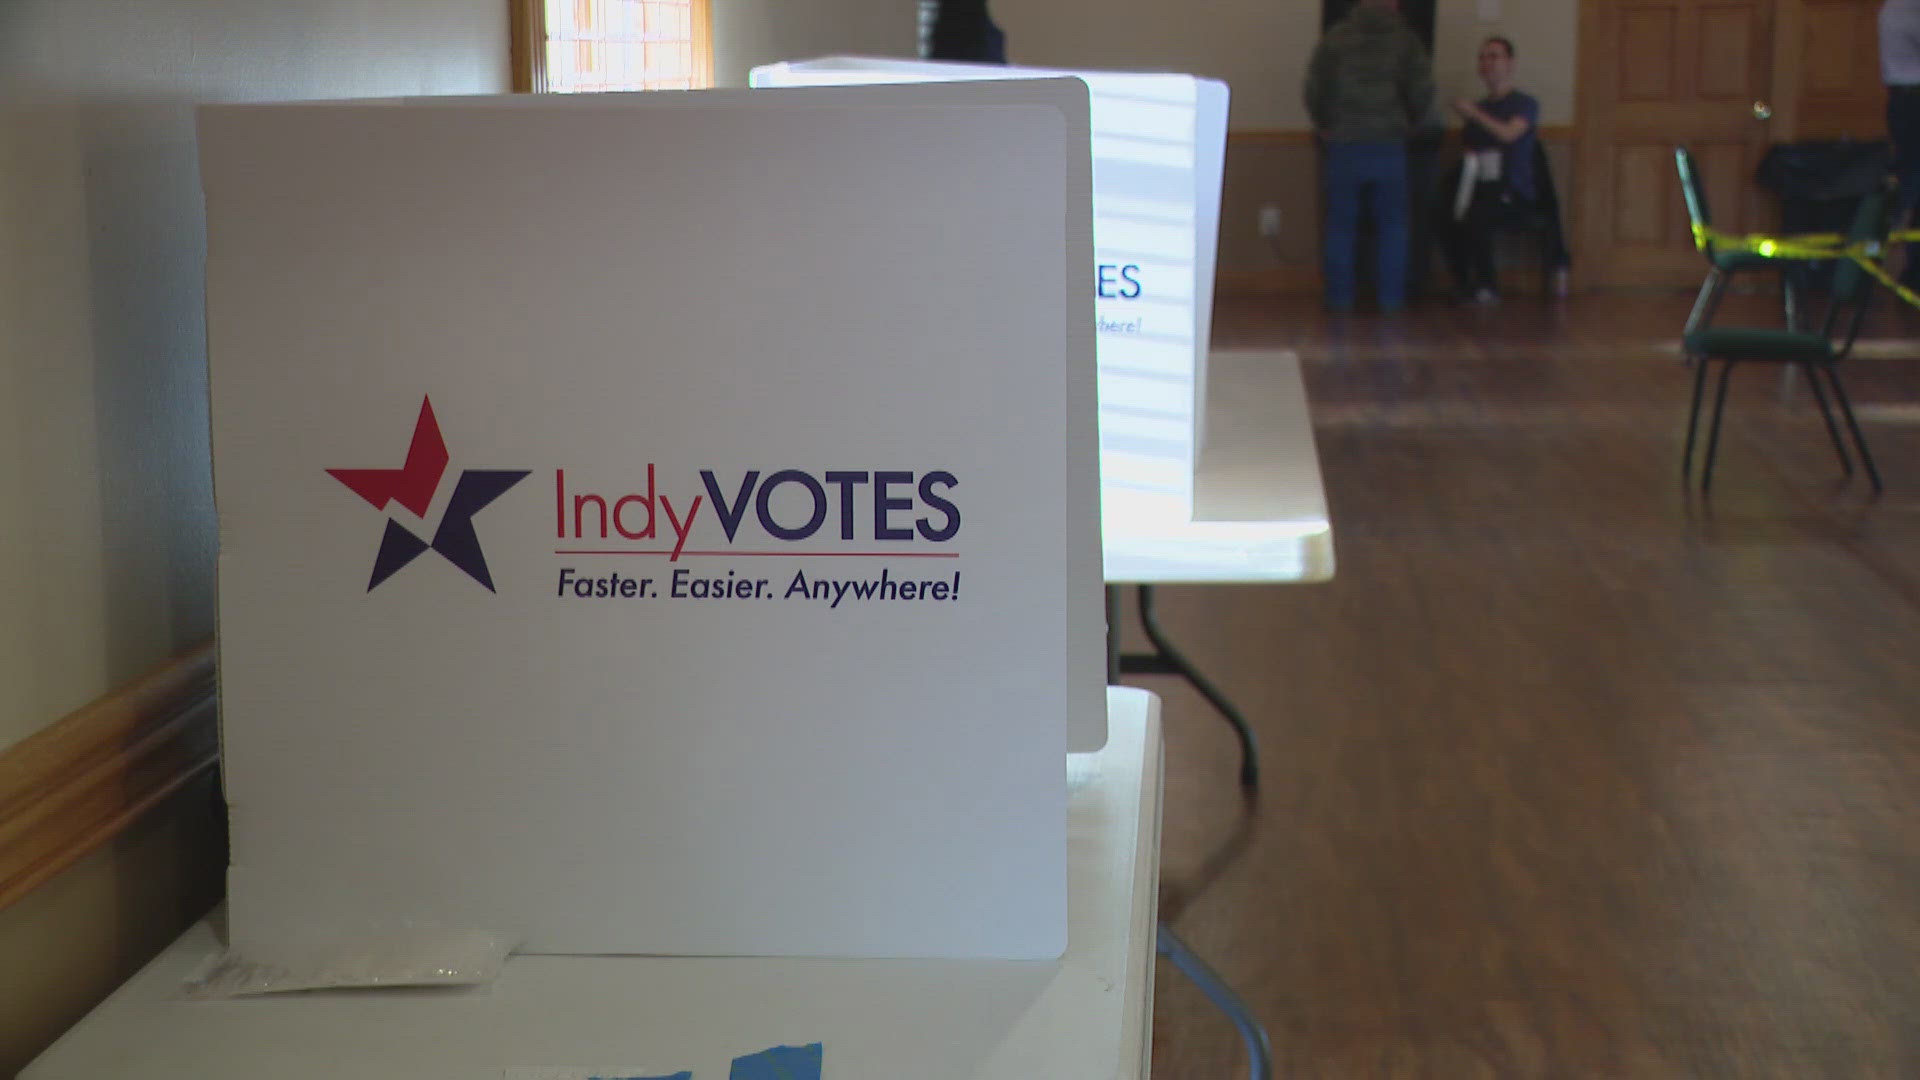 13News reporter Logan Gay breaks down what voters need to know ahead of Tuesday's primary election.